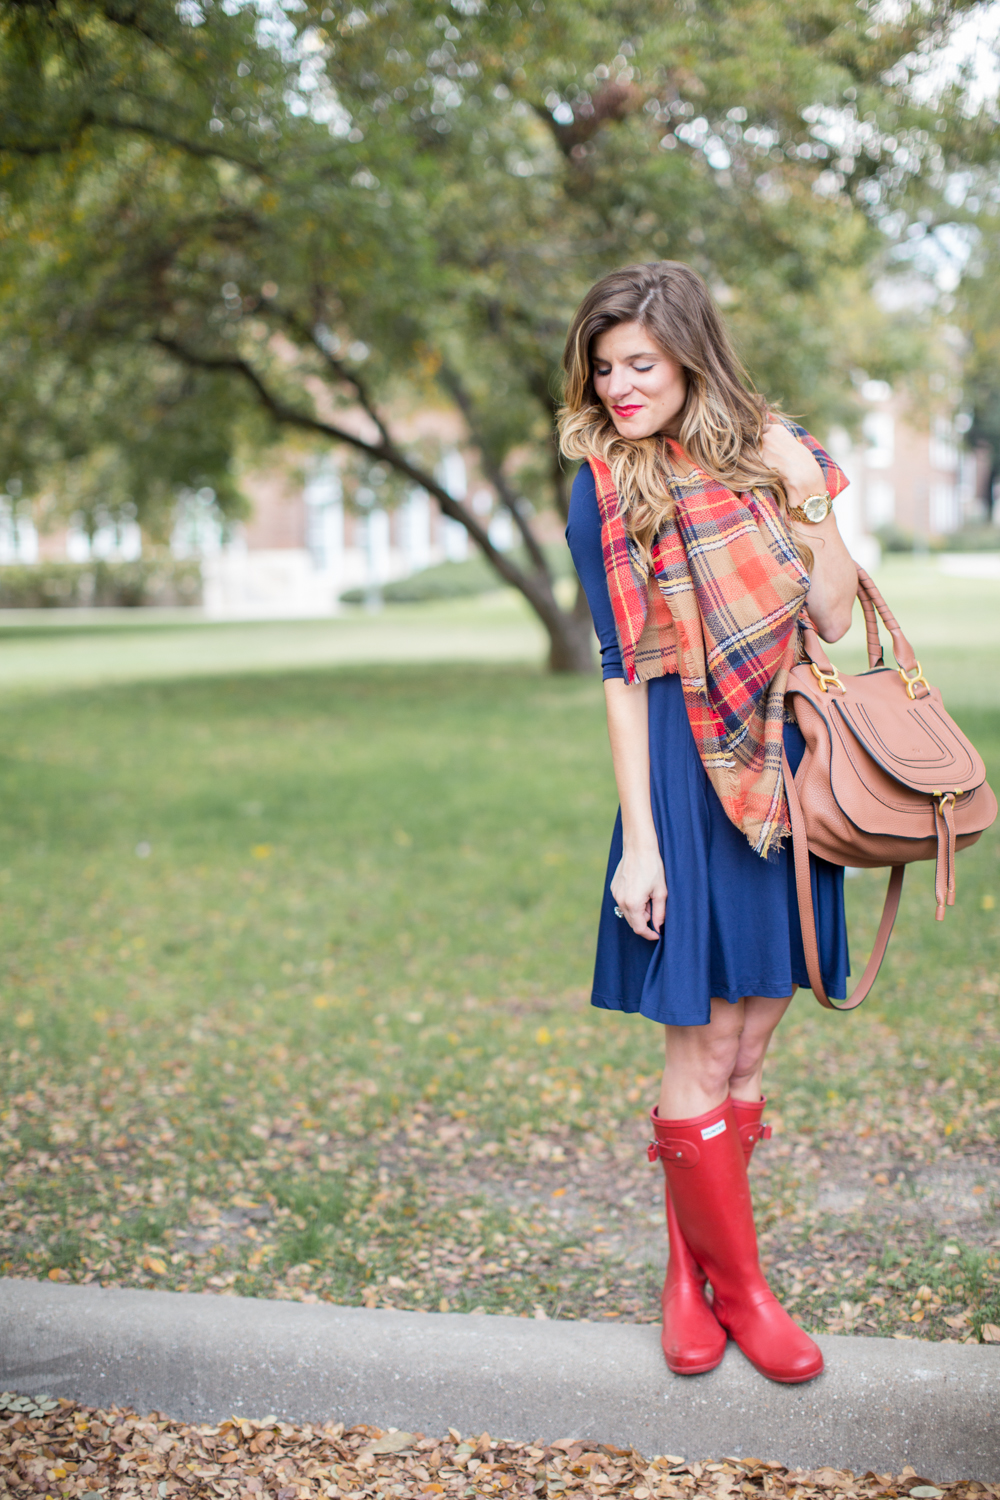 Rainy day outfit ideas - what to wear on a rainy day - navy swing dress, blanket scarf, red hunter boots